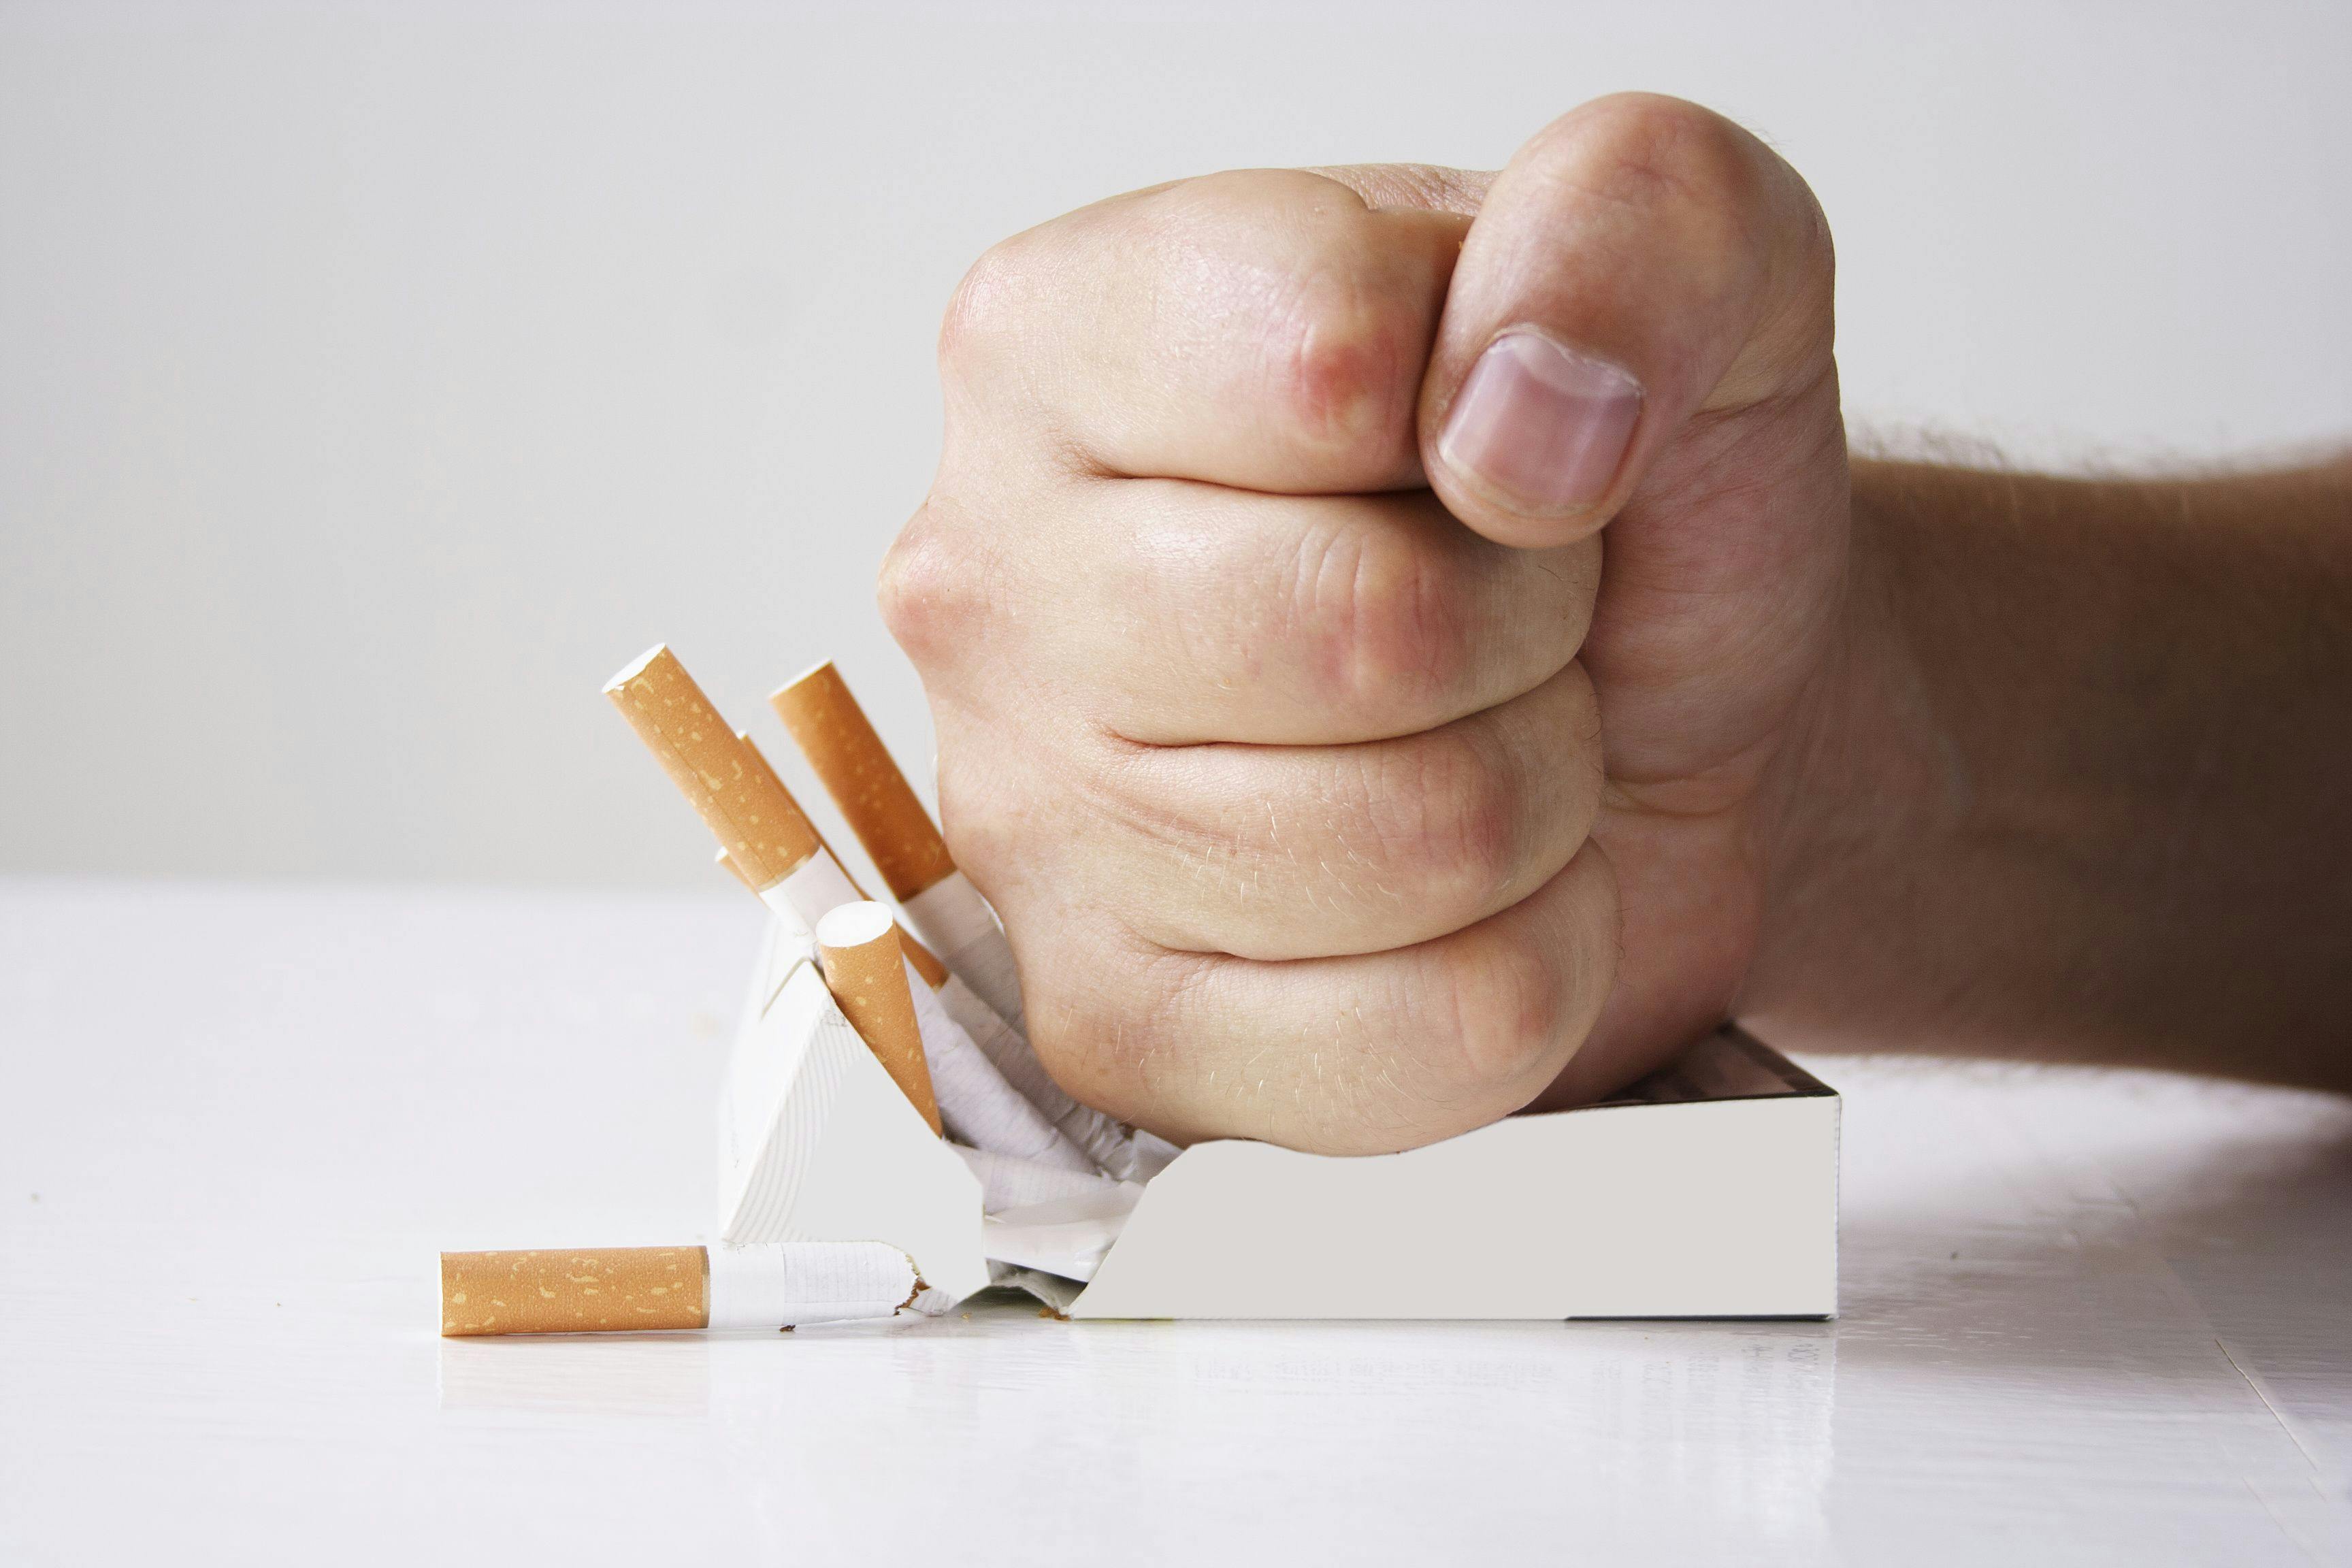 Smoking is Associated With Increased Risk of COVID-19